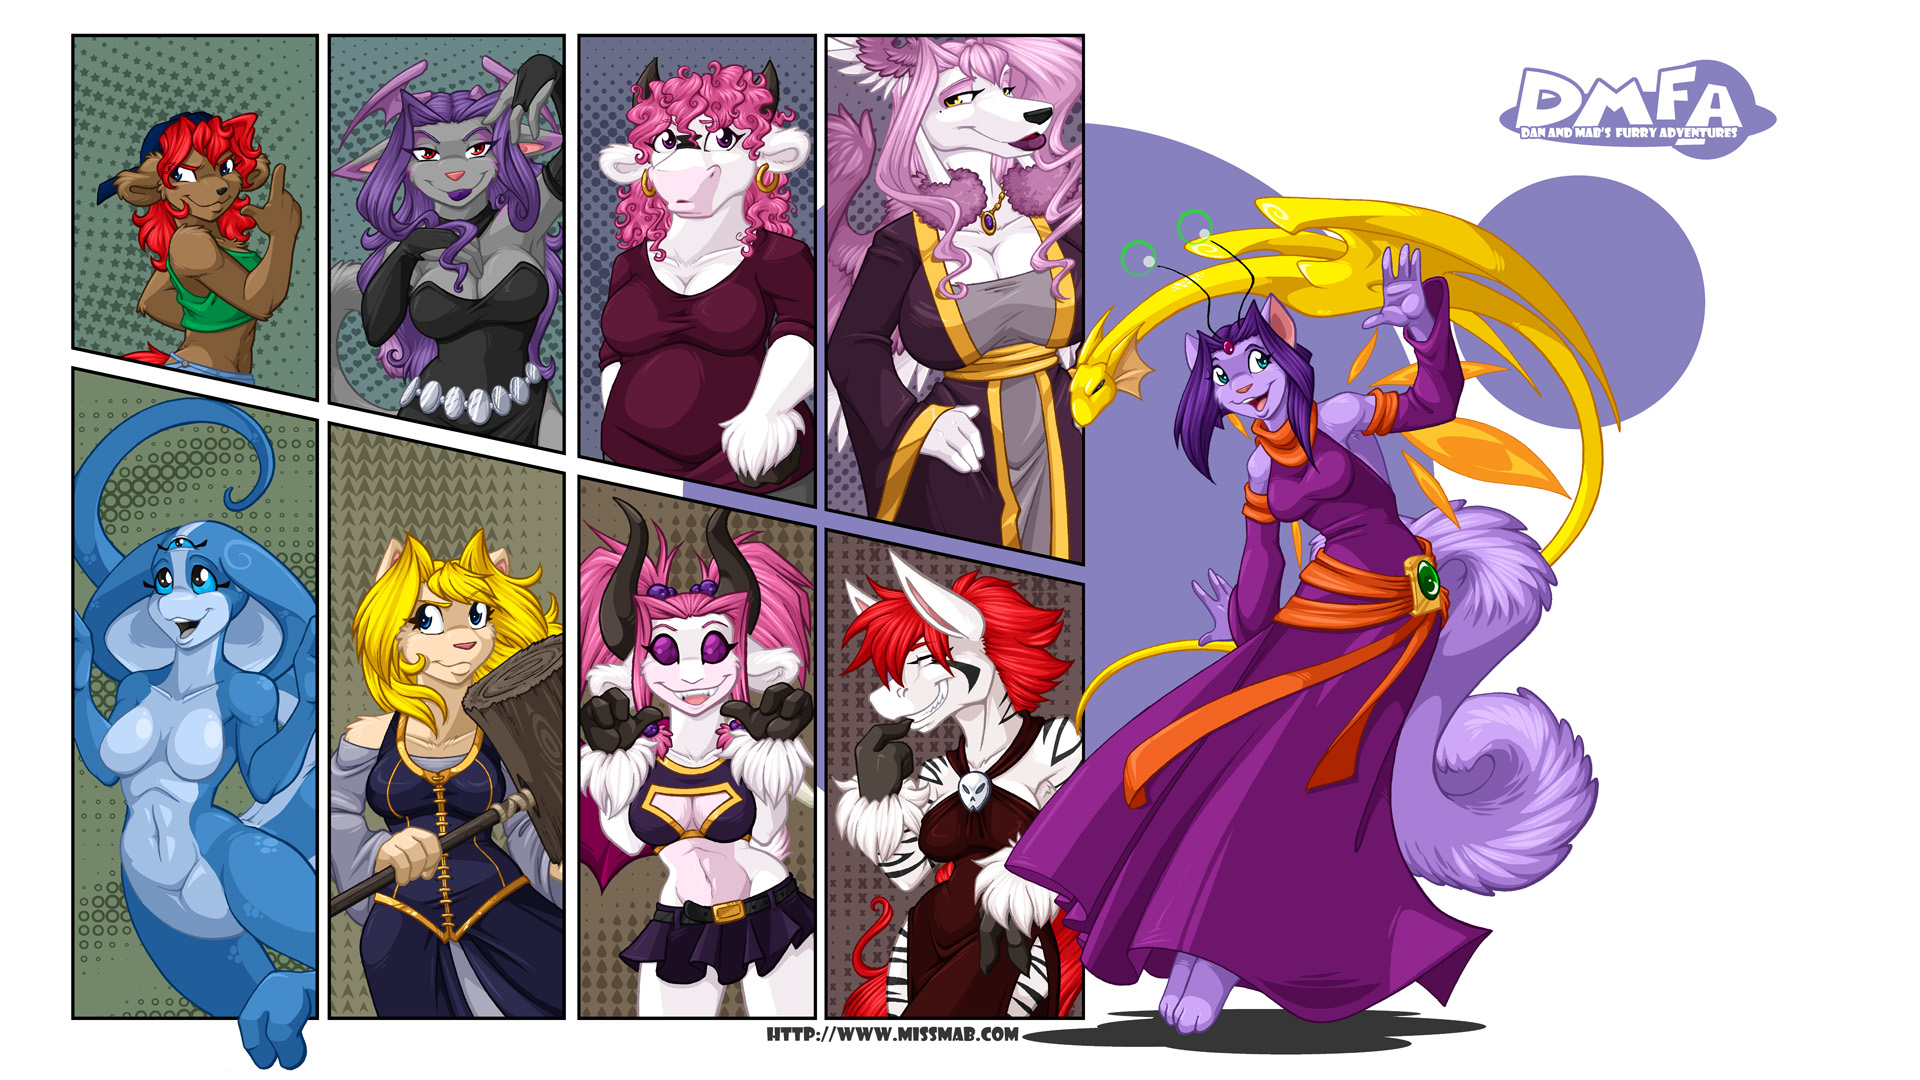 A diverse group of furry women presented in a collage. A red-headed ferret, a pink-headed cow and dog, a blonde cat, etc. Some characters feature horns or head-wings. There is also a cute blue three-eyed undressed lizard-like creature. The clear lead-character, a purple fae-kitty in a purple dress with orange sashes, is waving. An angry-lloking small yellow cartoony drake flies around her.